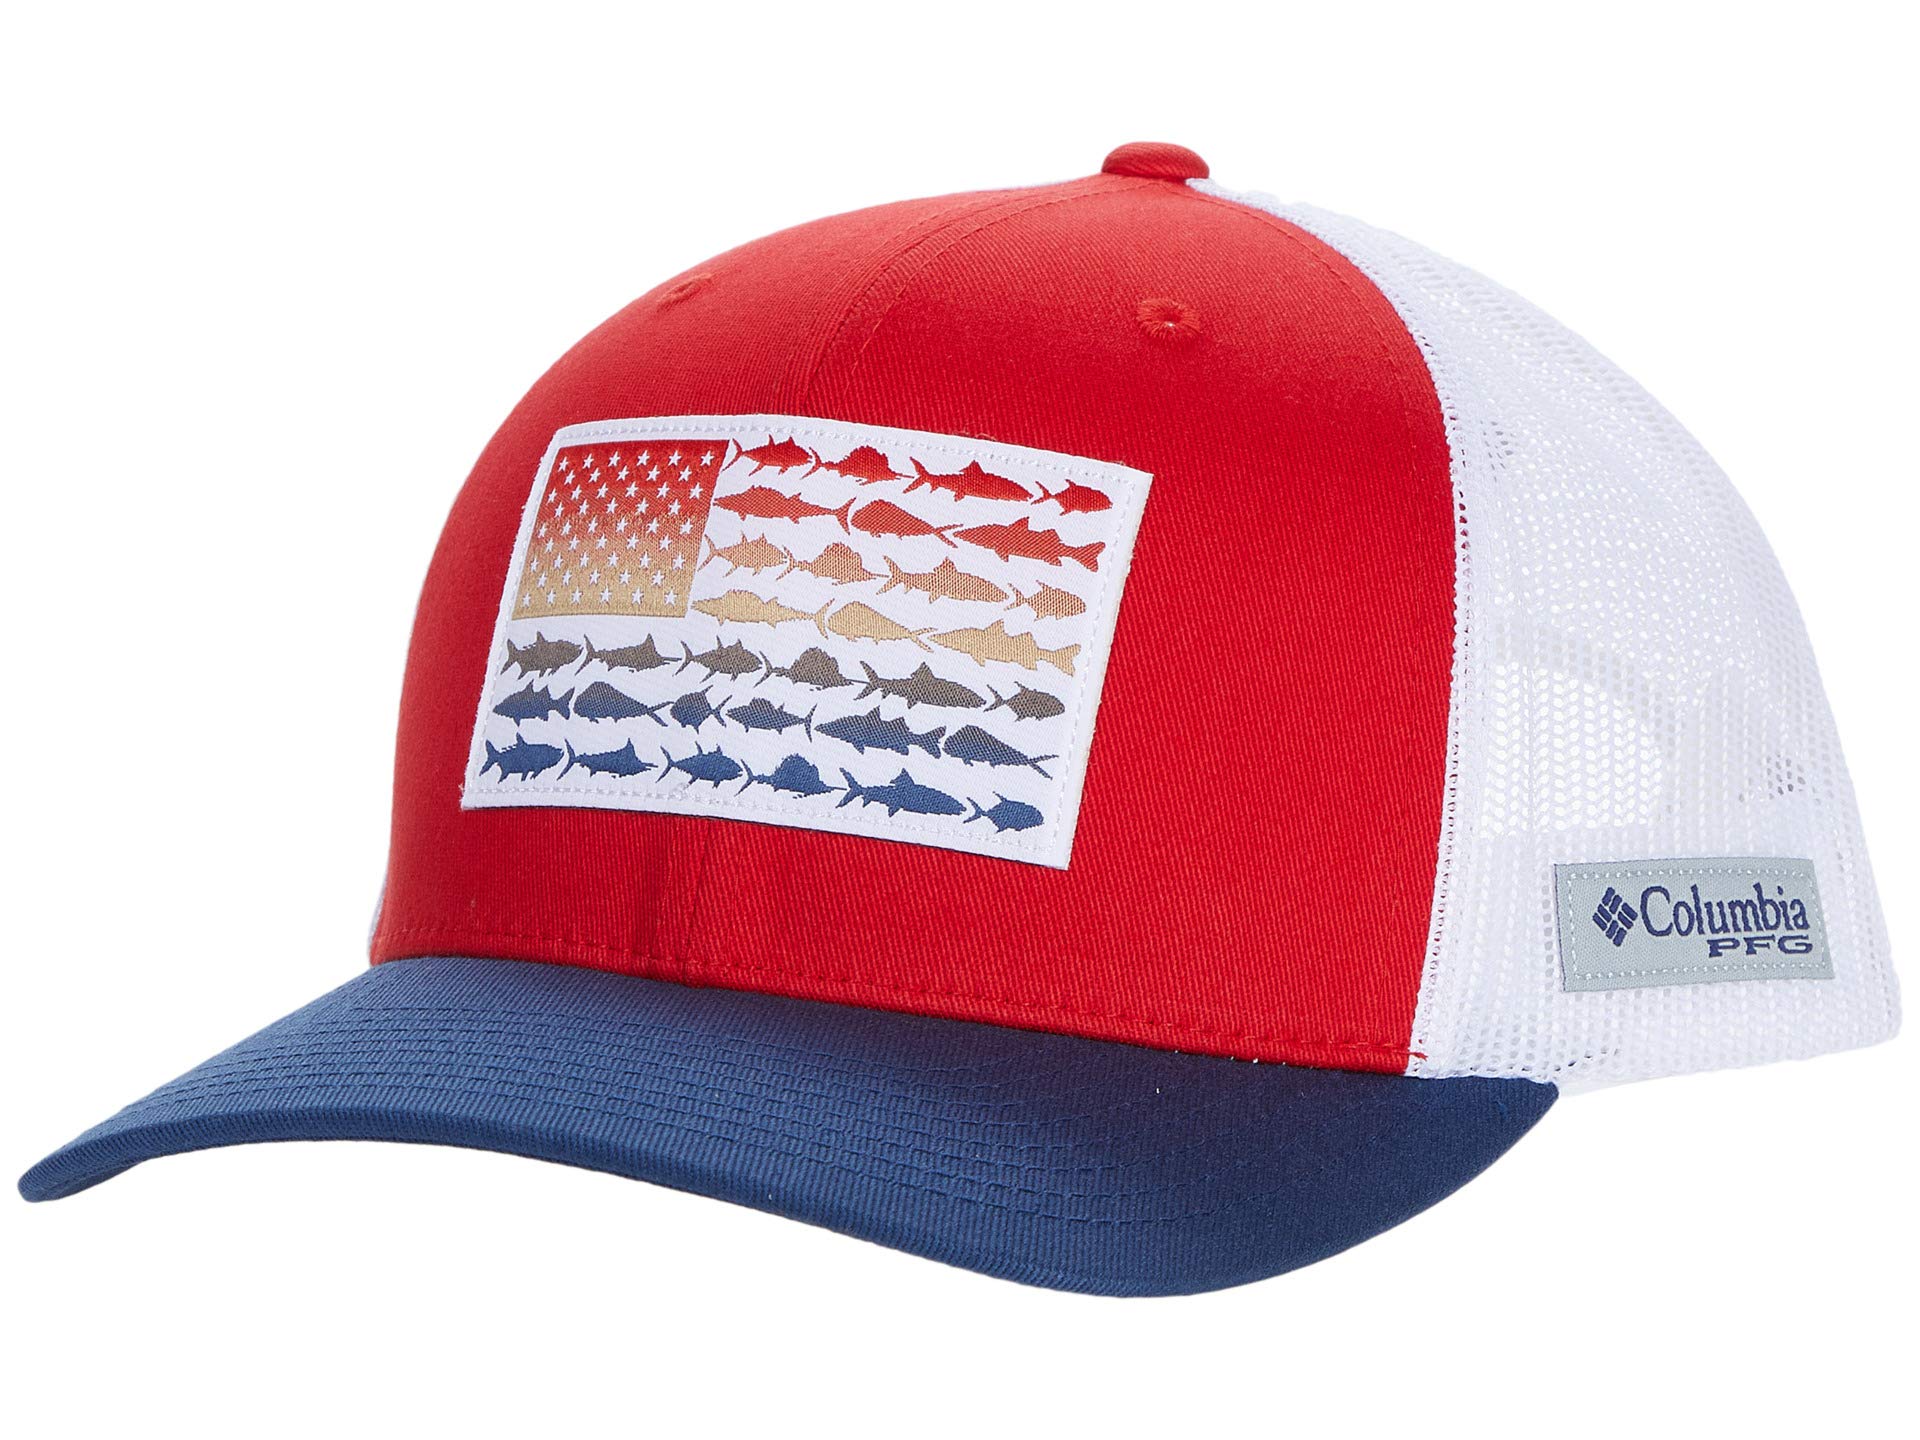 Purchase at a discount price, Columbia New Arrivals PFG Mesh™ Snapback Fish  Flag Ball Cap 62% off